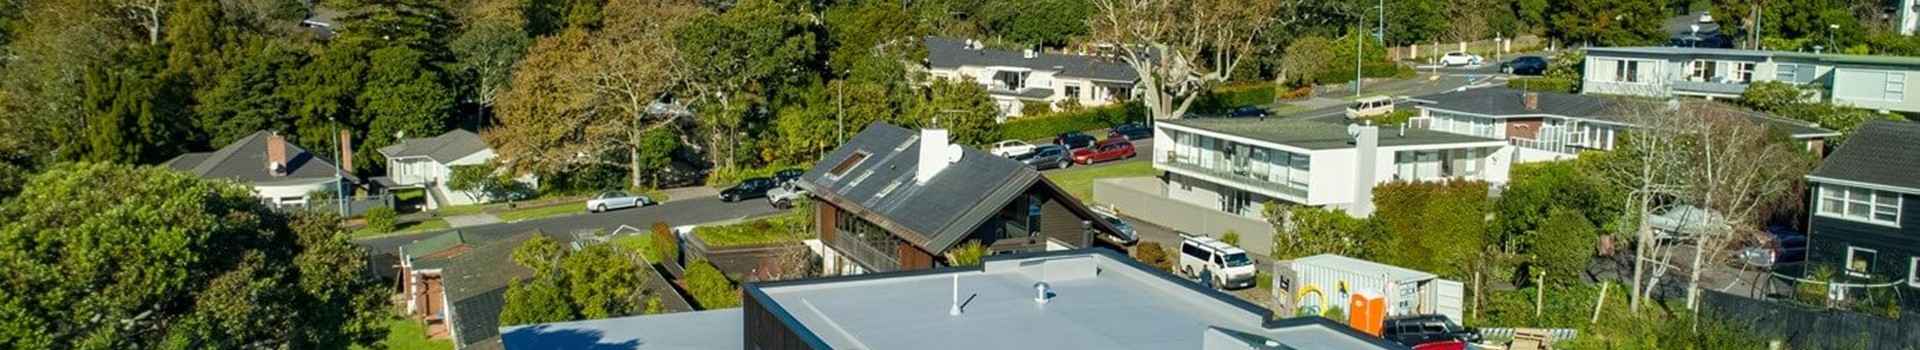 Energy Efficiency - Warm roof technology need not be complex